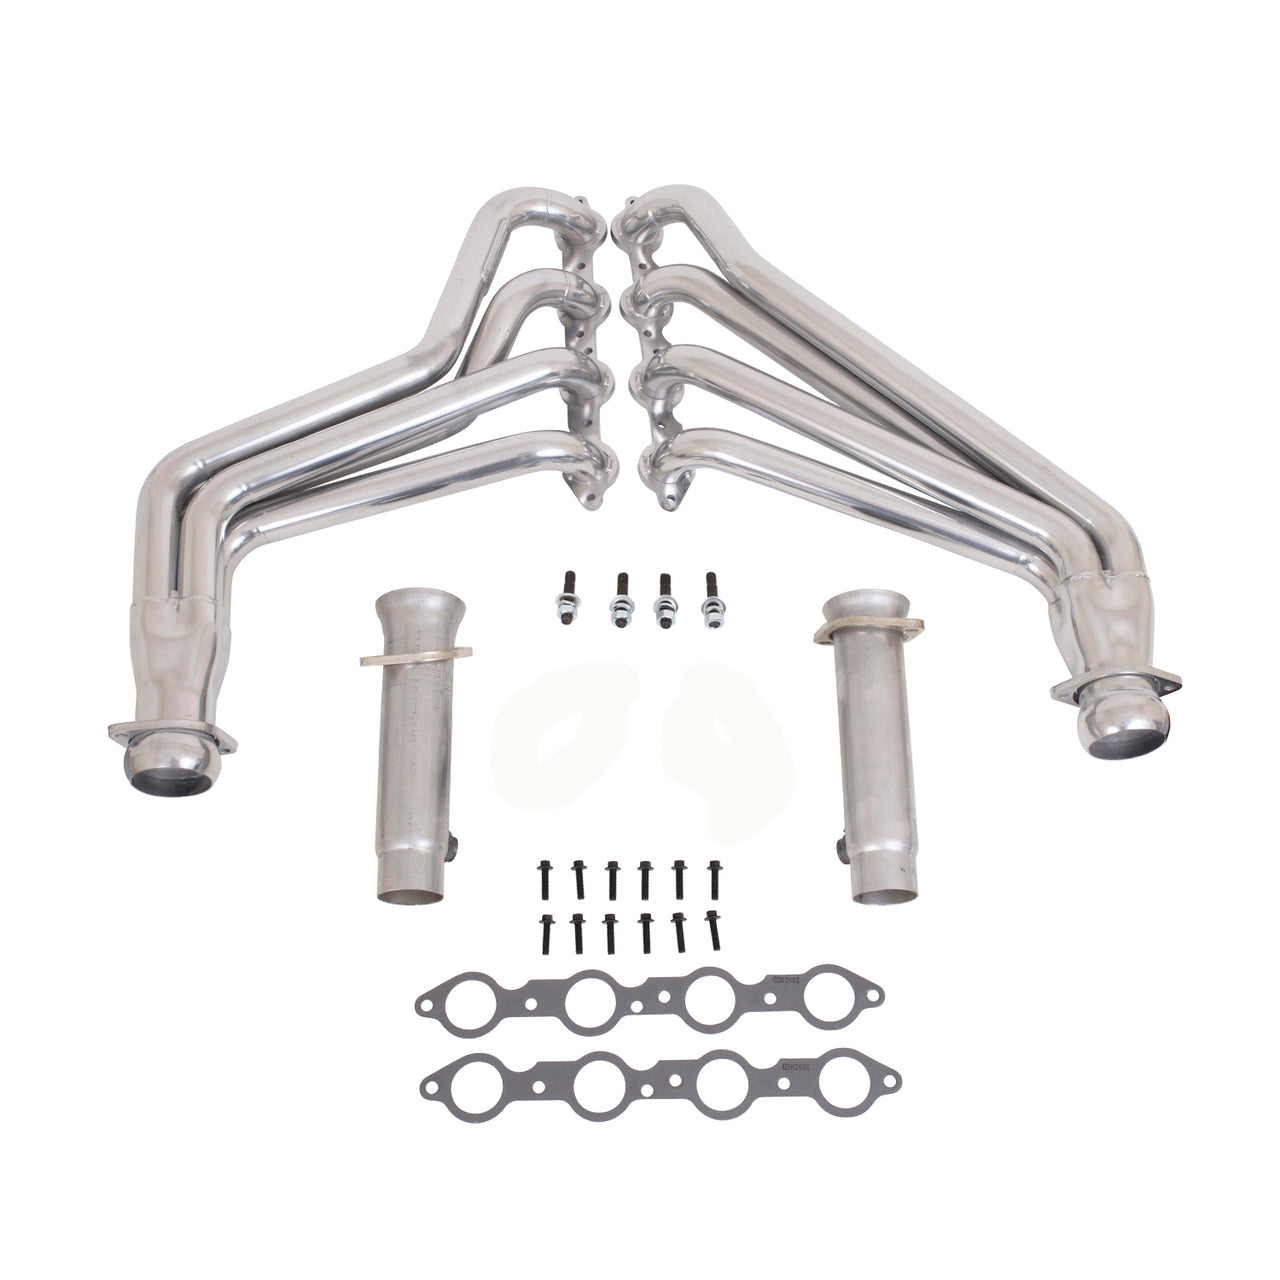 2010-2015 CAMARO LS3/L99 1-7/8 LONG TUBE HEADERS W/CATS SYSTEM (POLISHED SILVER CERAMIC)